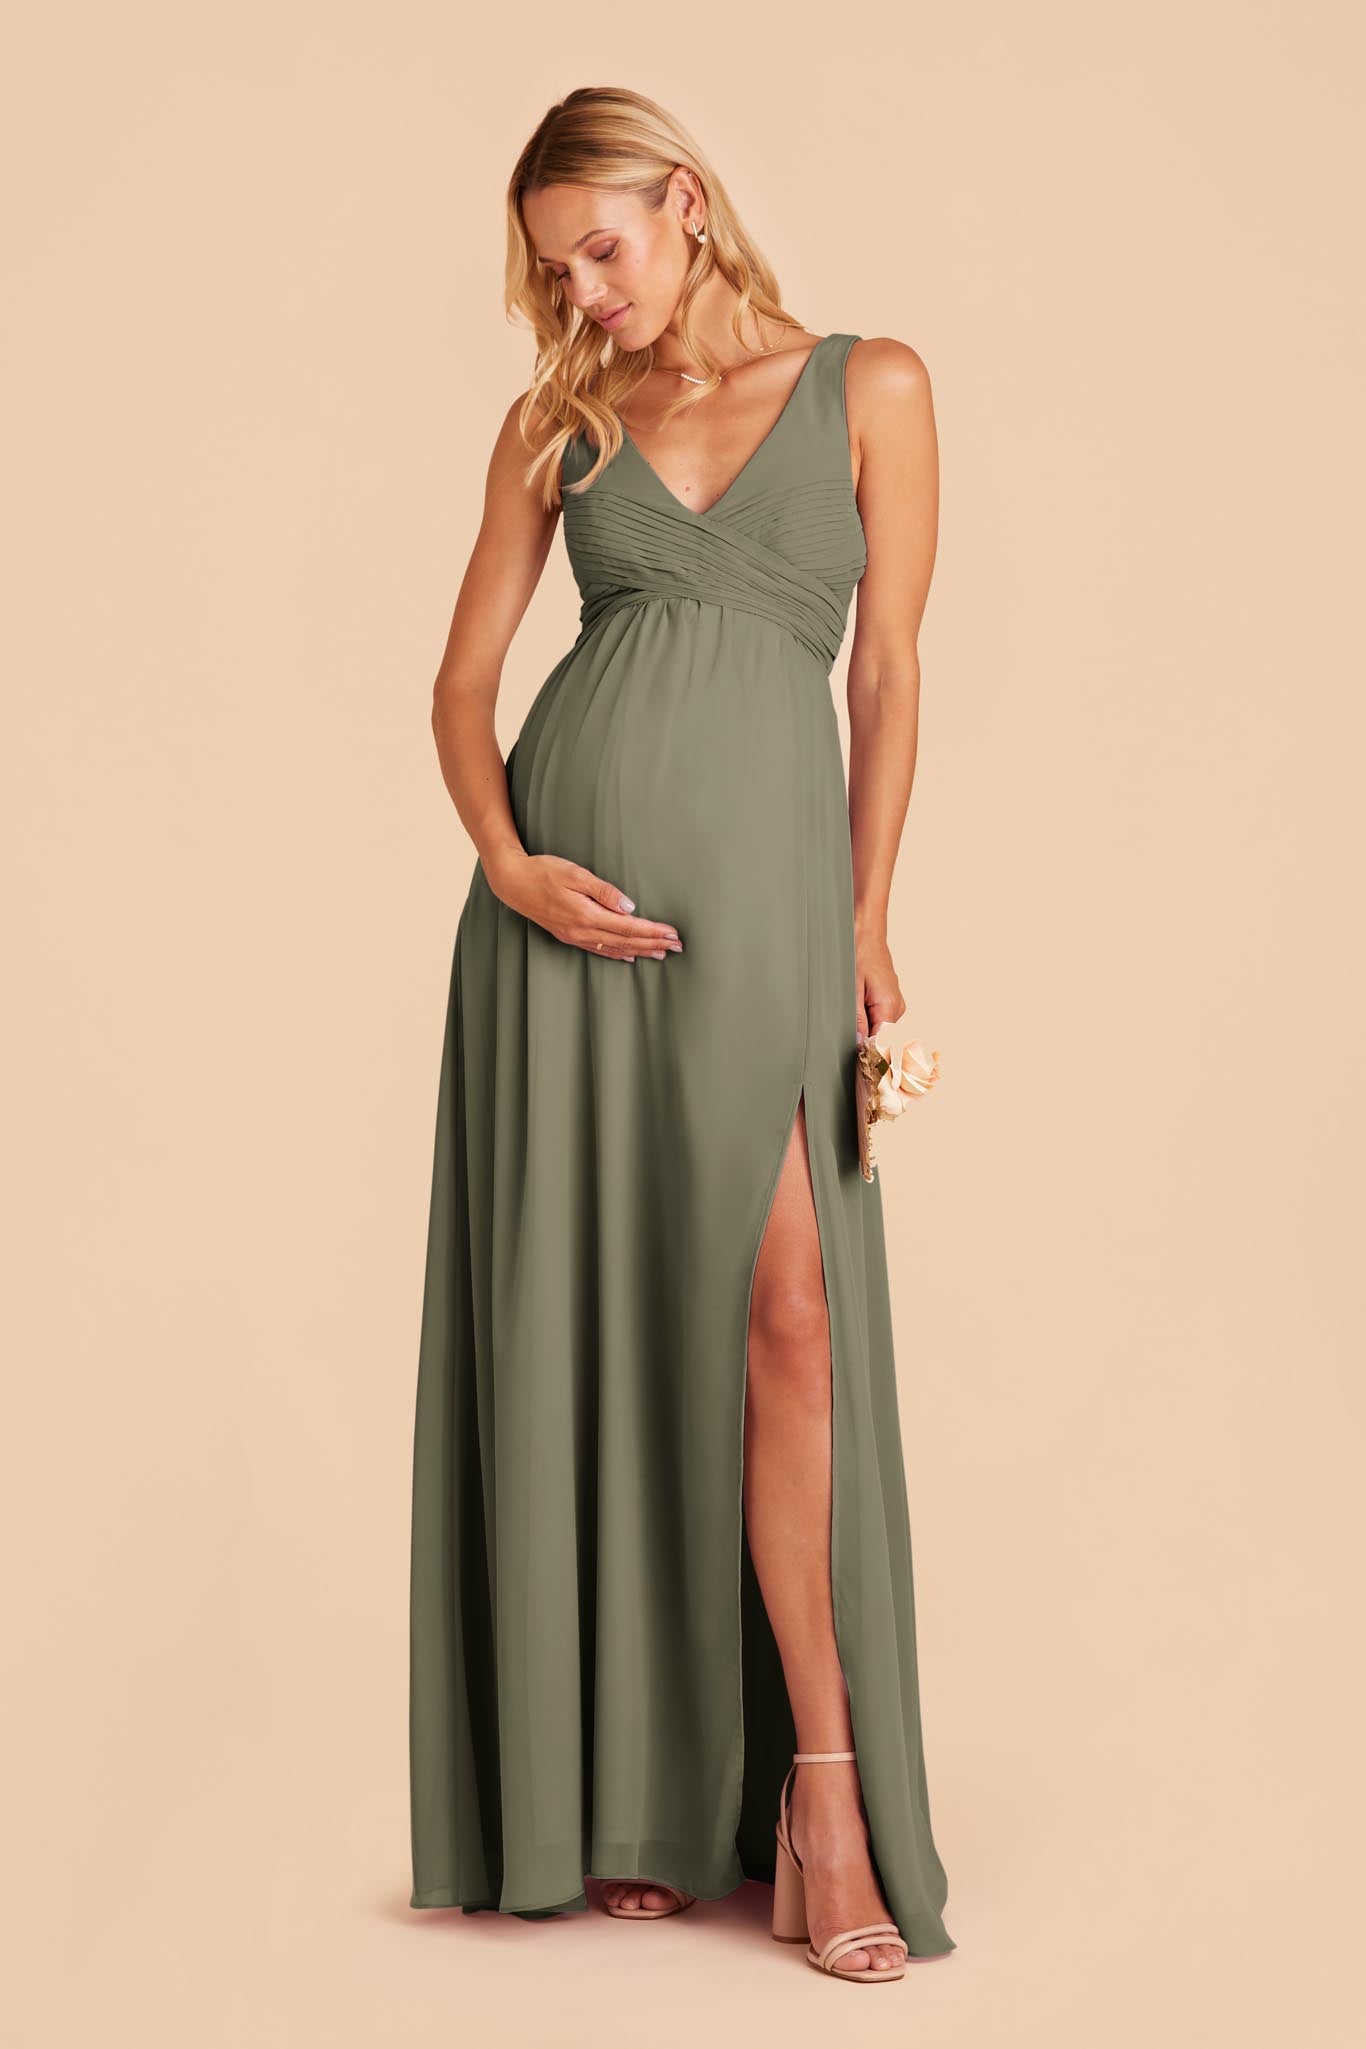 Moss Green Laurie Empire Dress by Birdy Grey